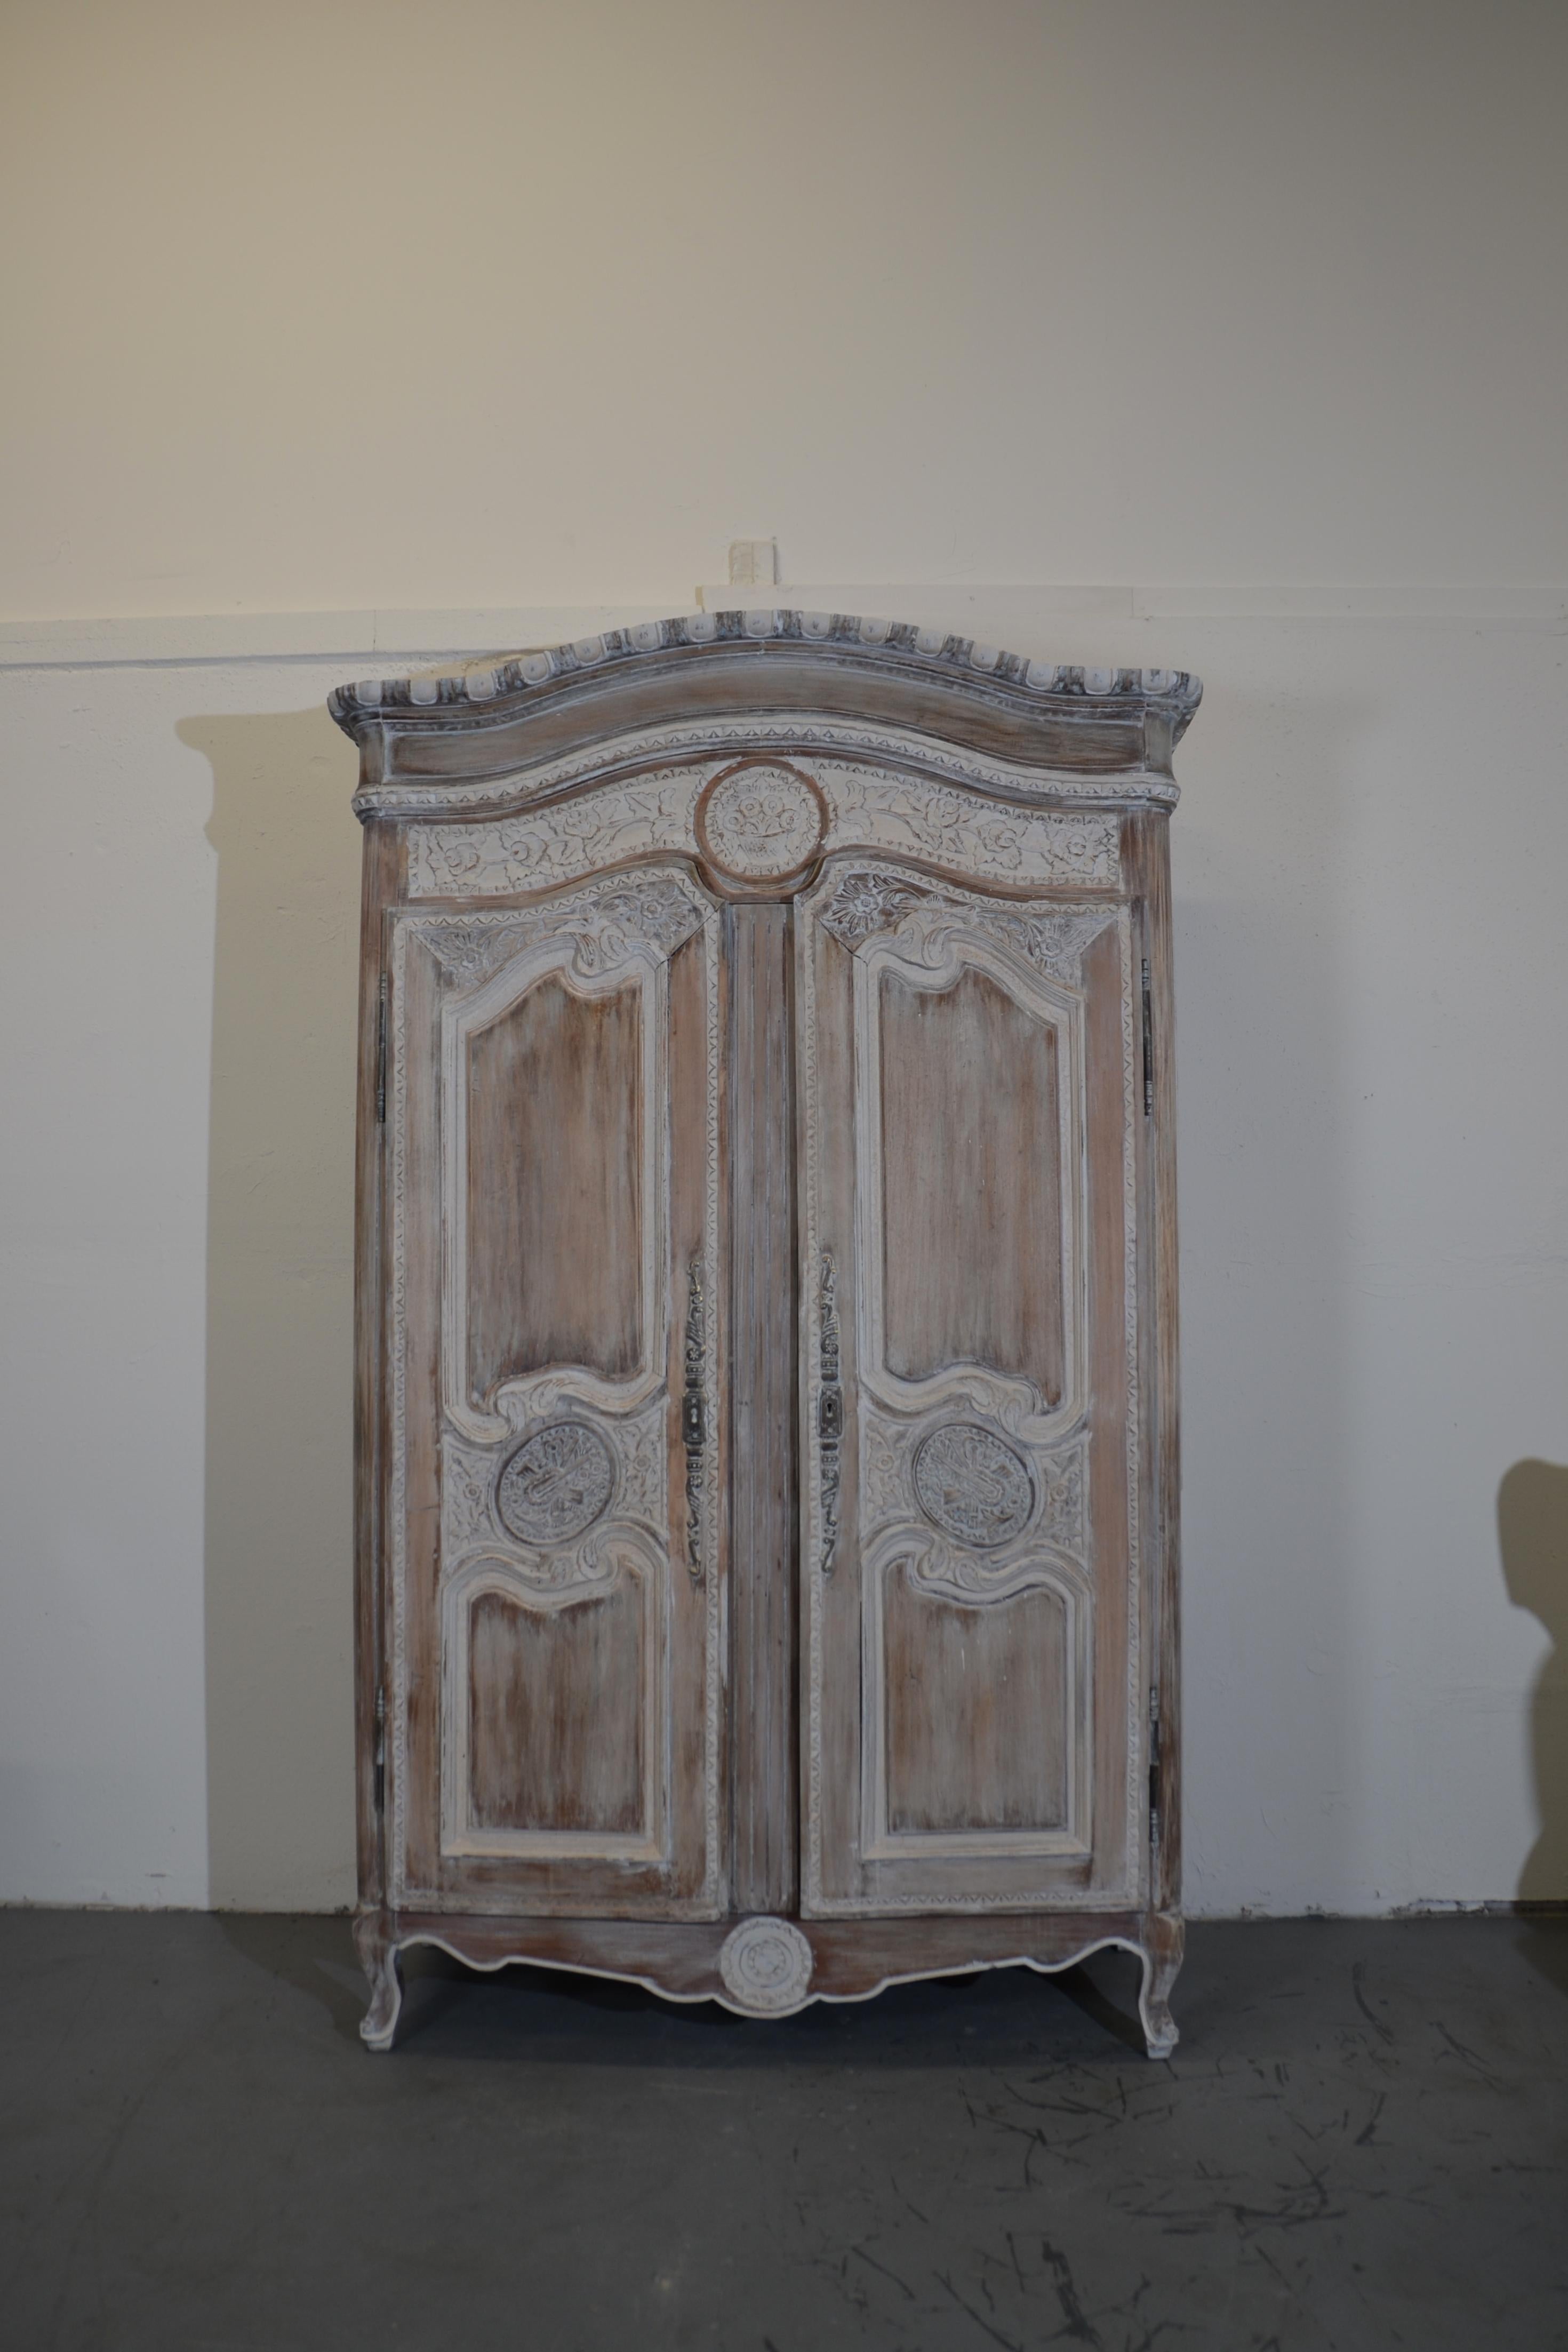 Louis xv style two-door hand-painted armoire. The shelves are adjustable.